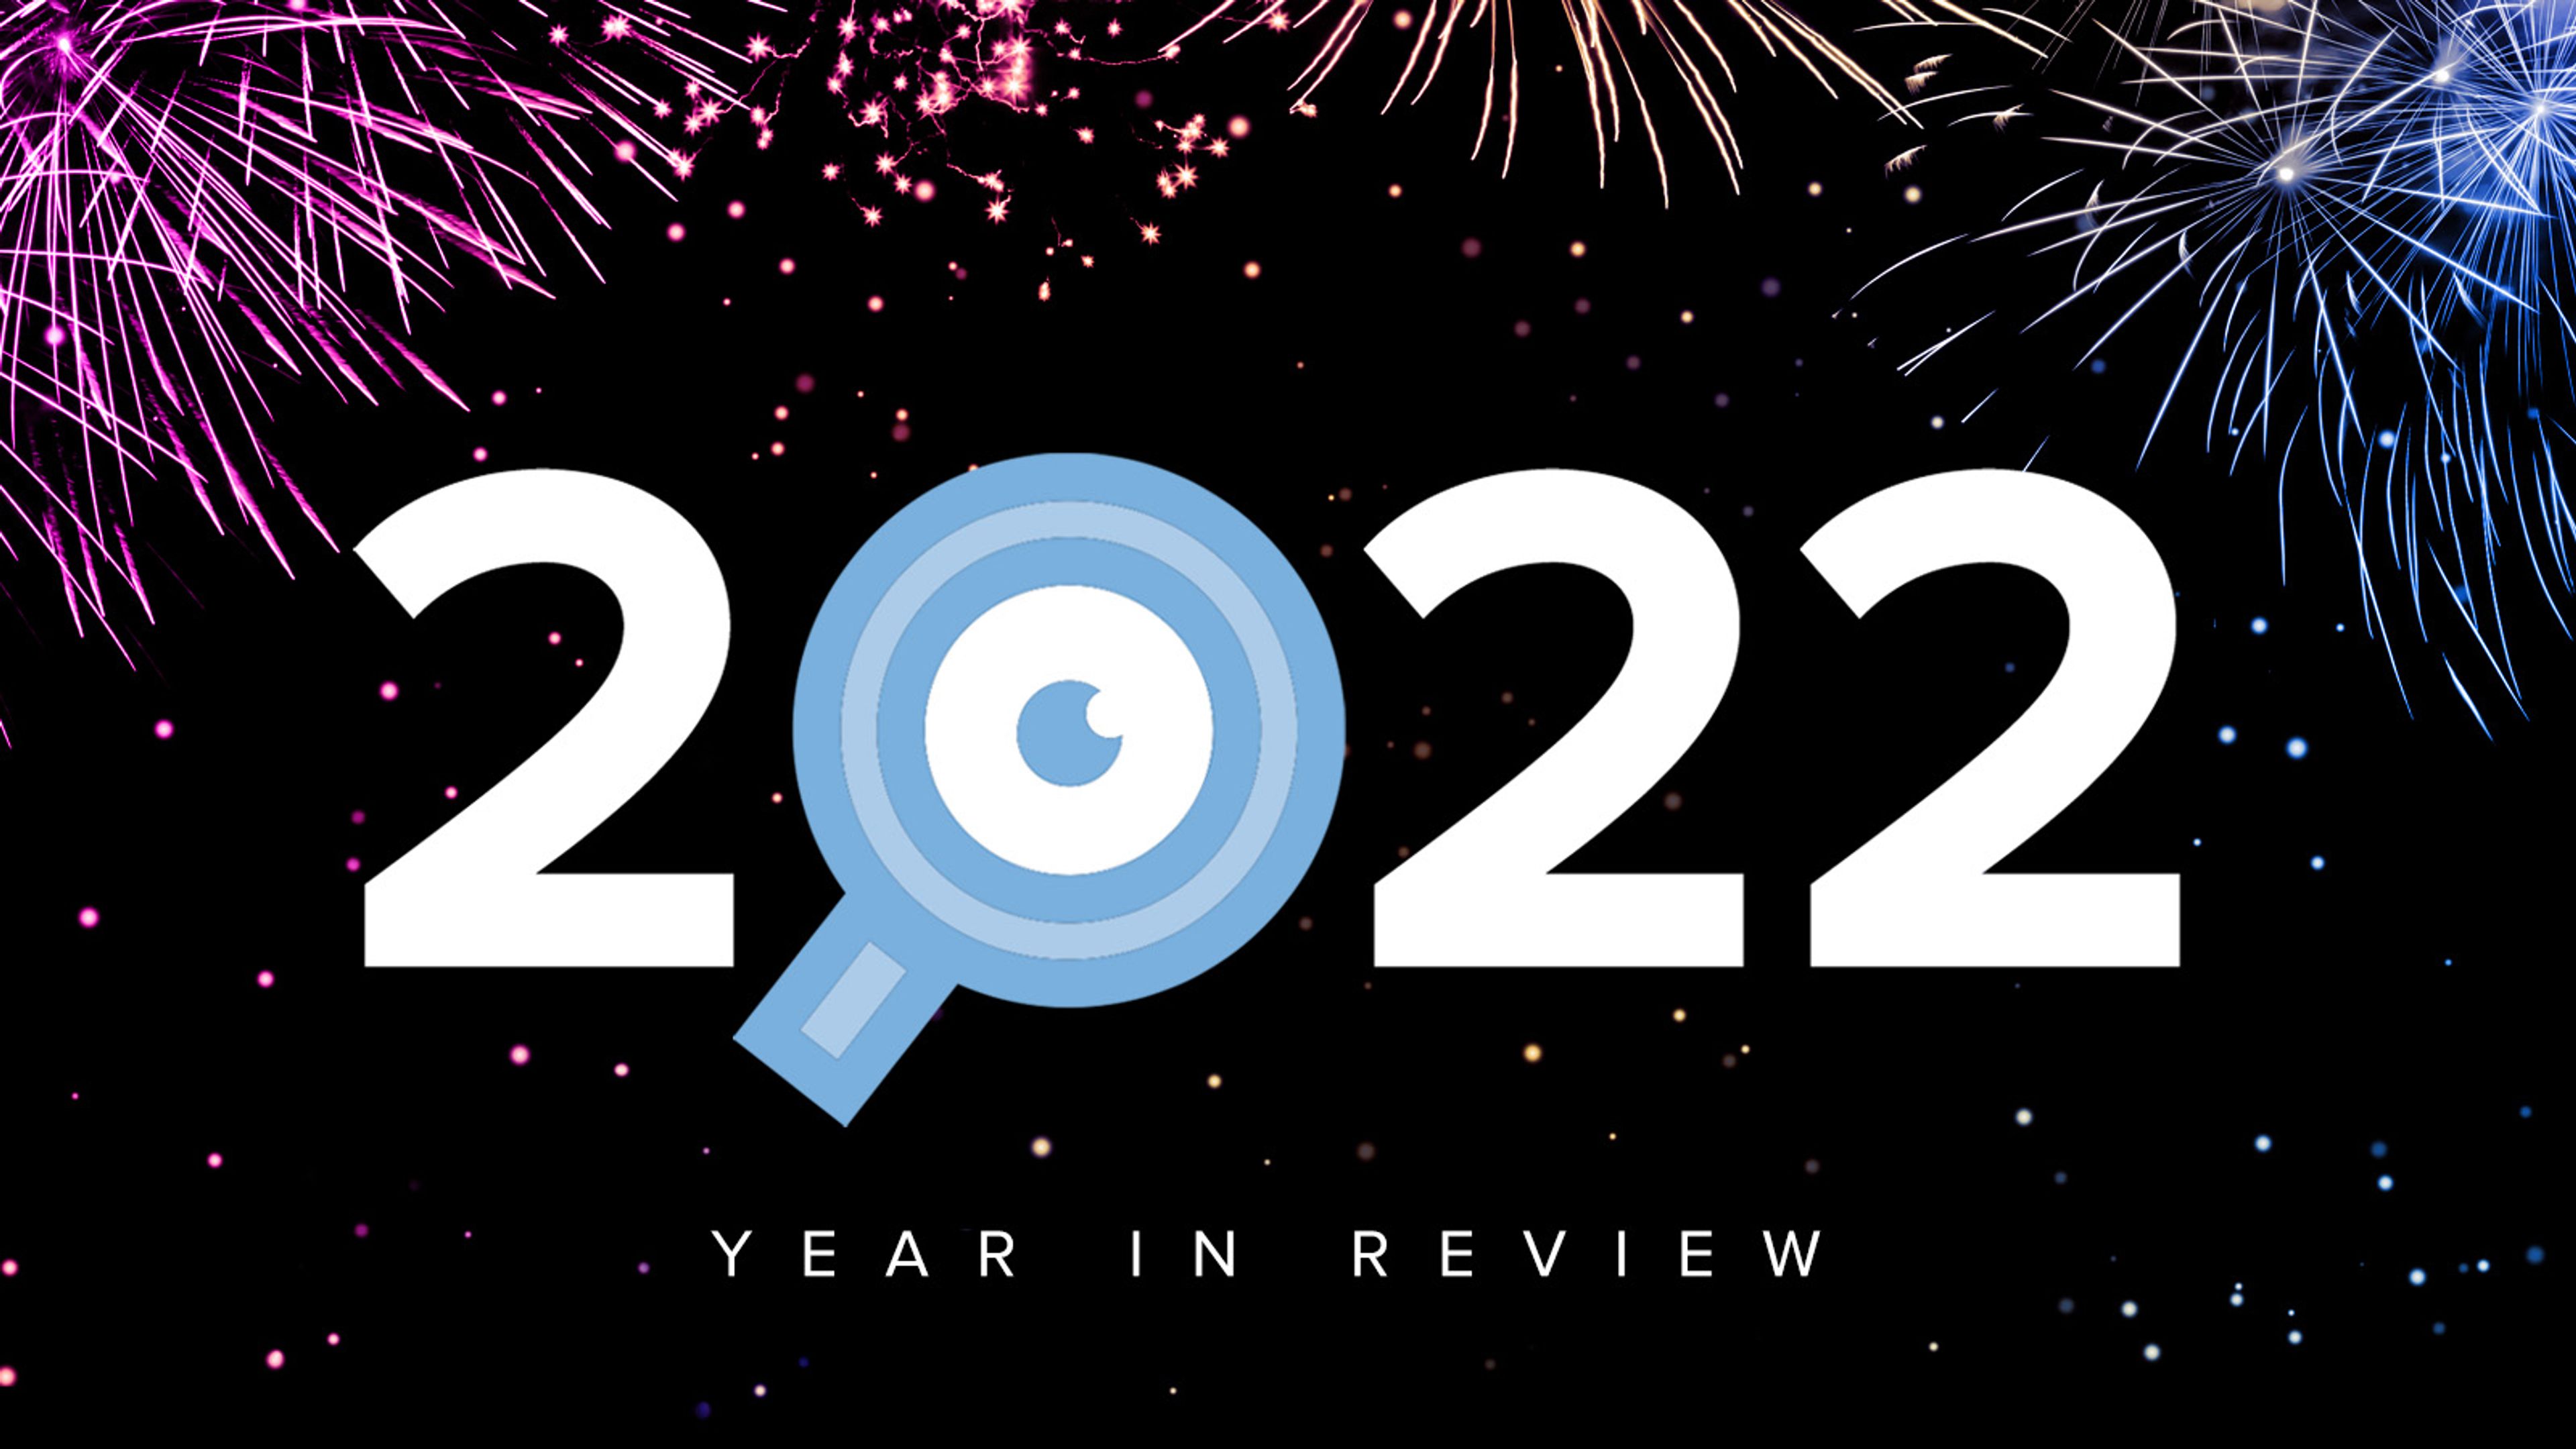 2022 Year in Review graphic with text and fireworks in the background